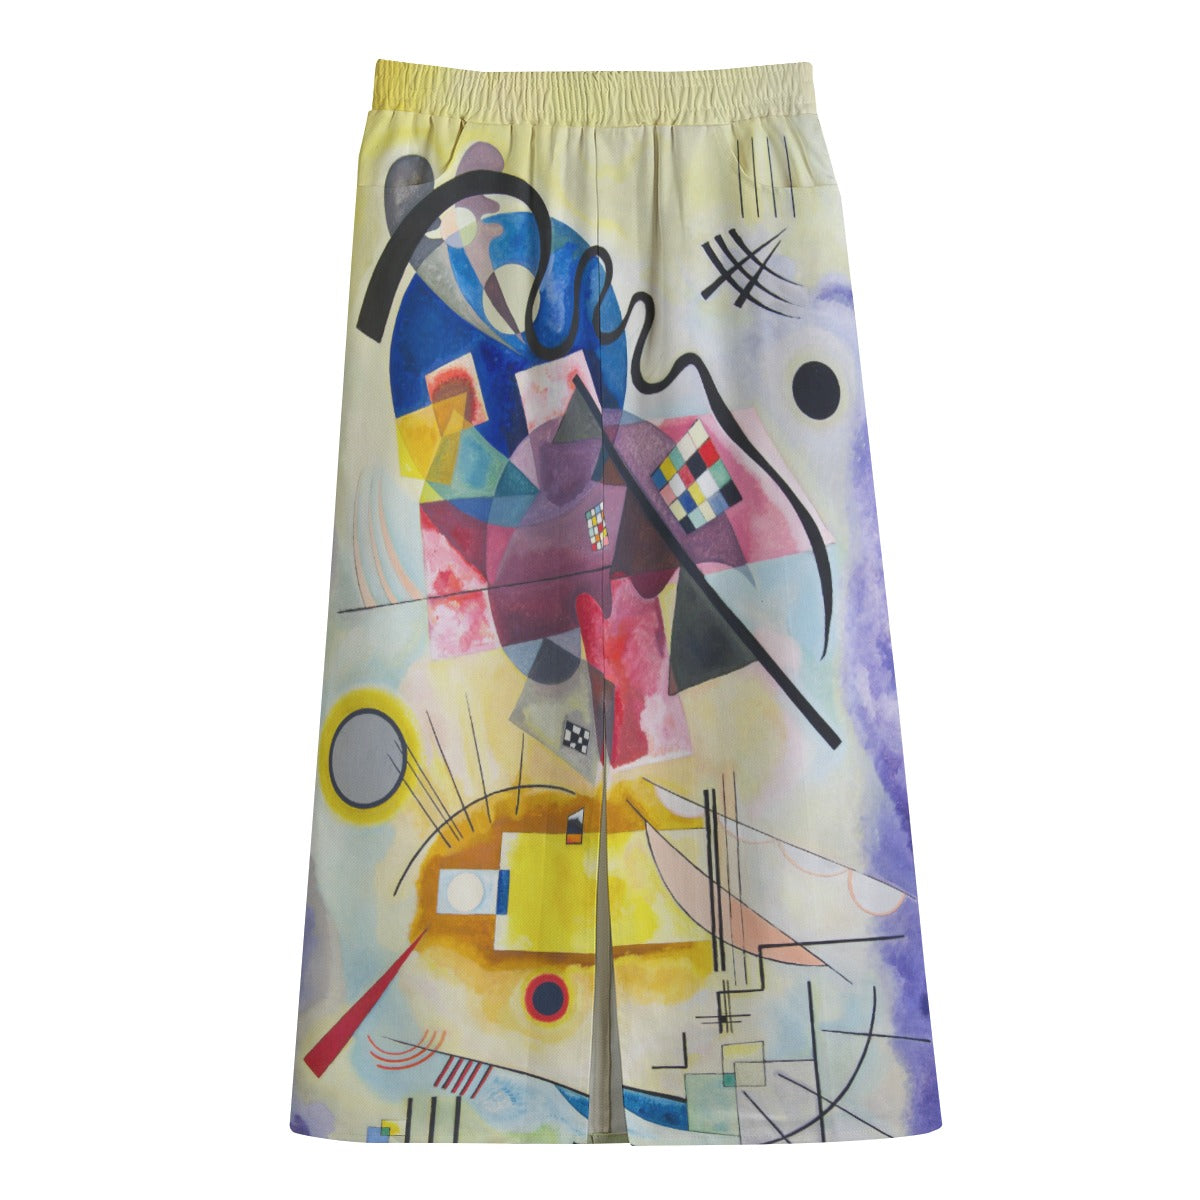 Colorful abstract skirt on white background